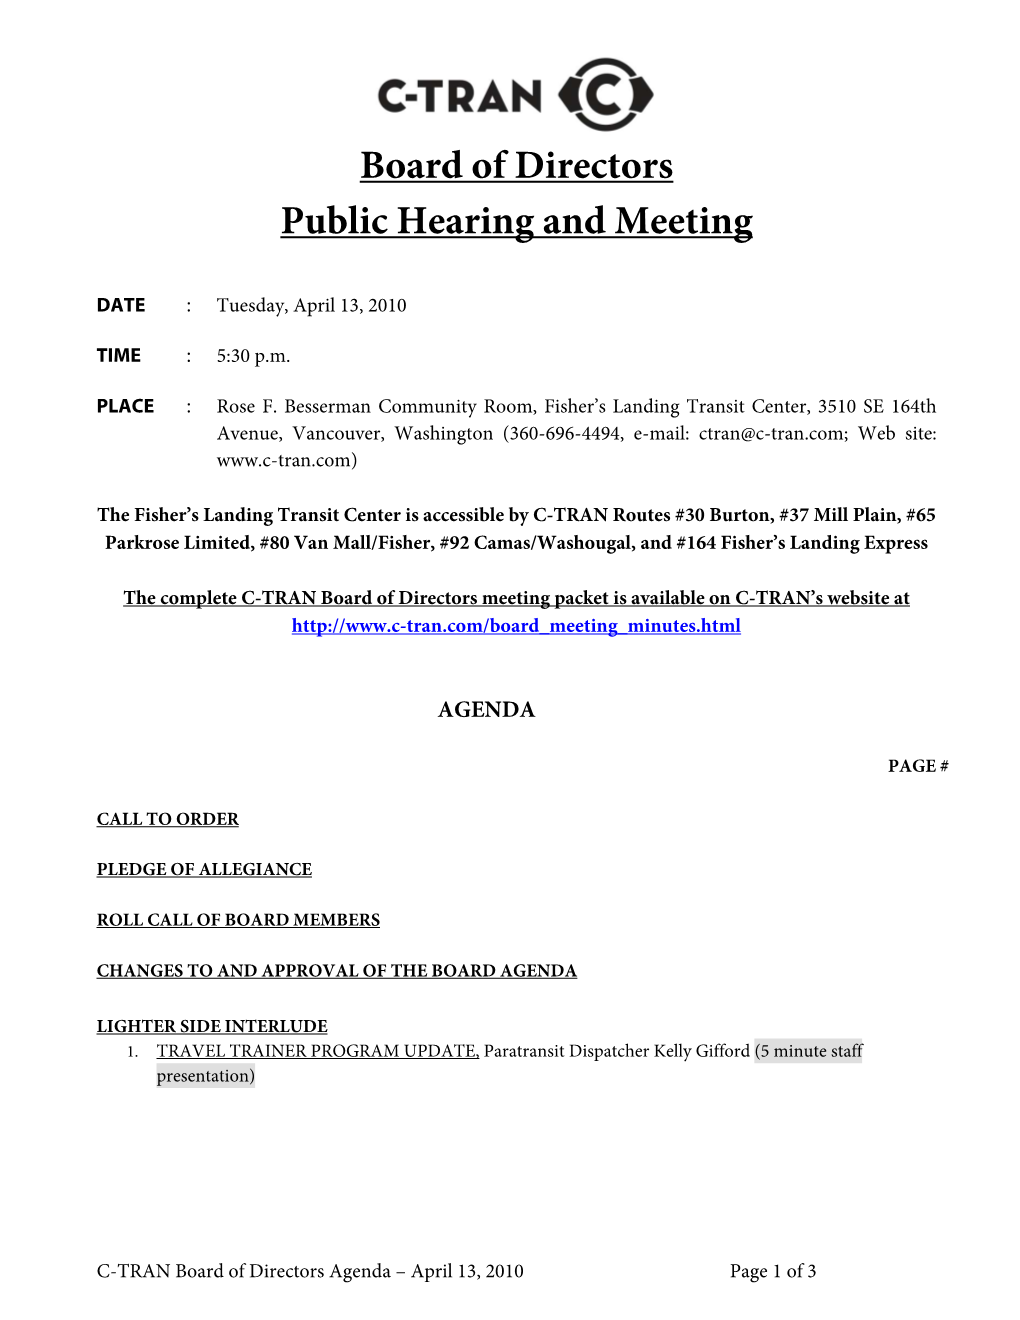 Board of Directors Public Hearing and Meeting